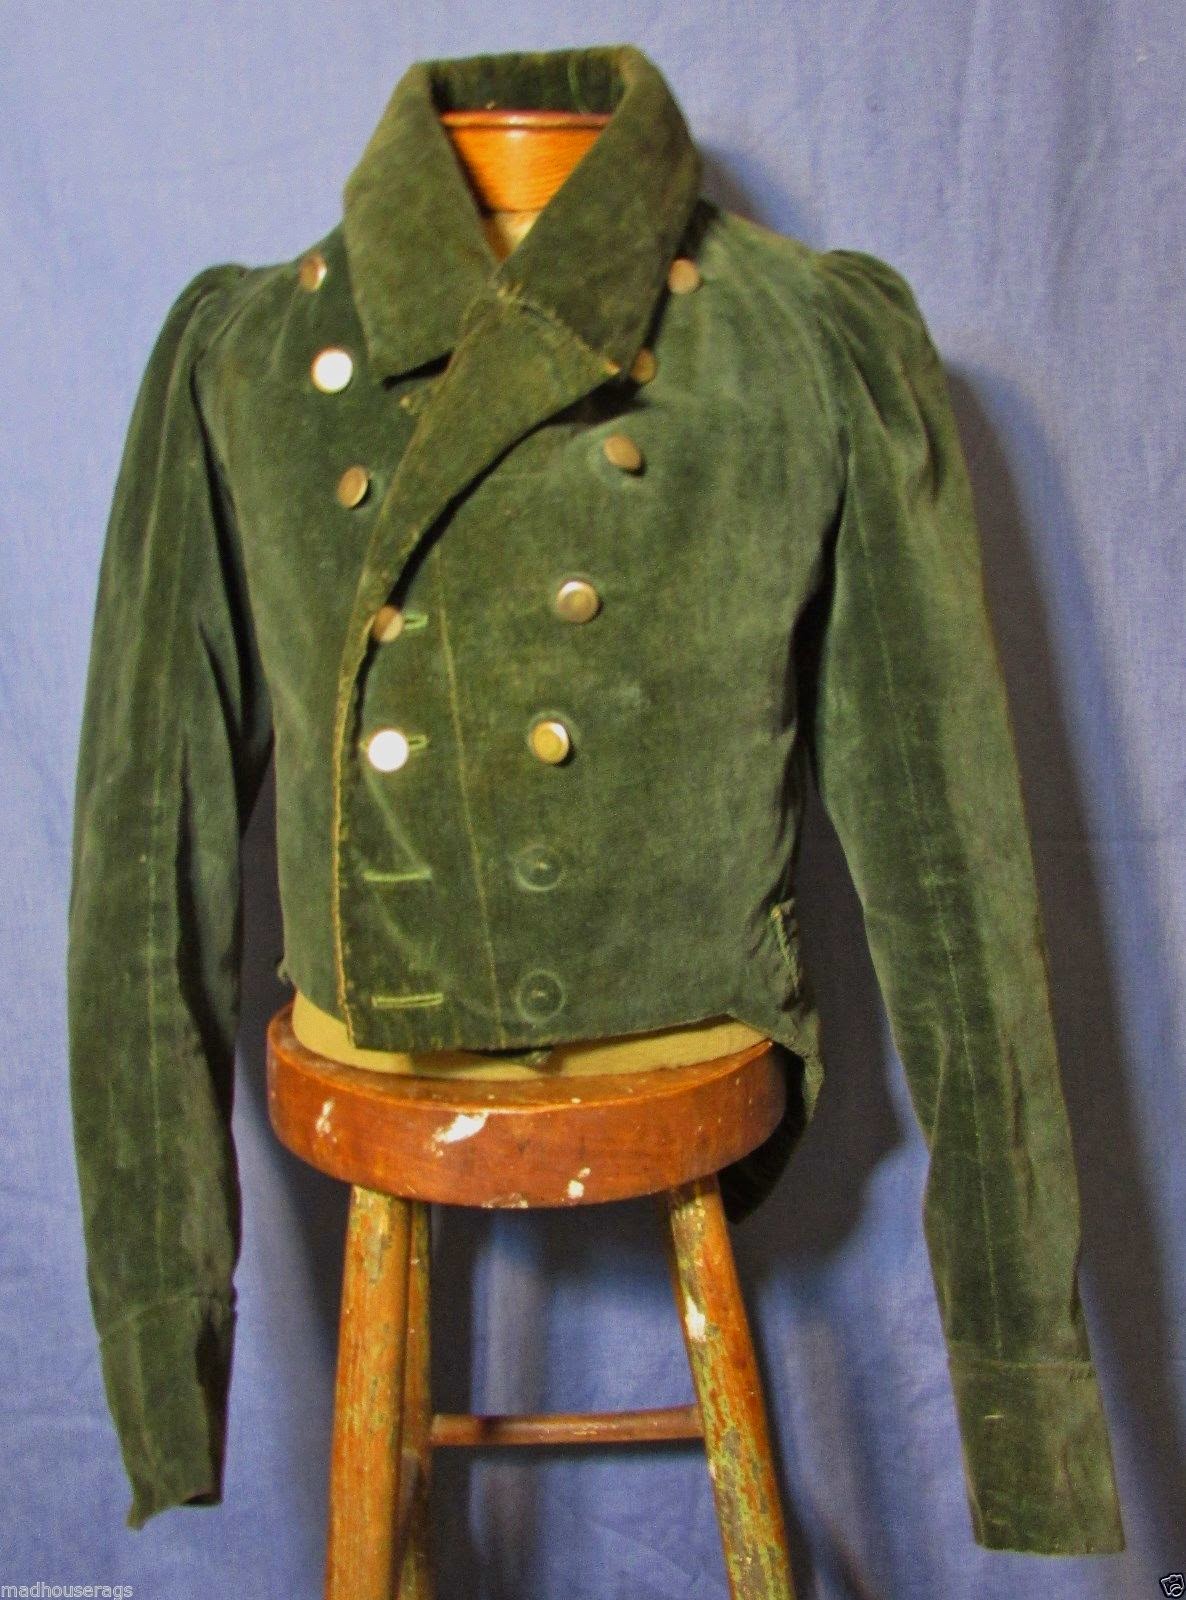 All The Pretty Dresses: Late 18th Century Women's Riding Habit Jacket!